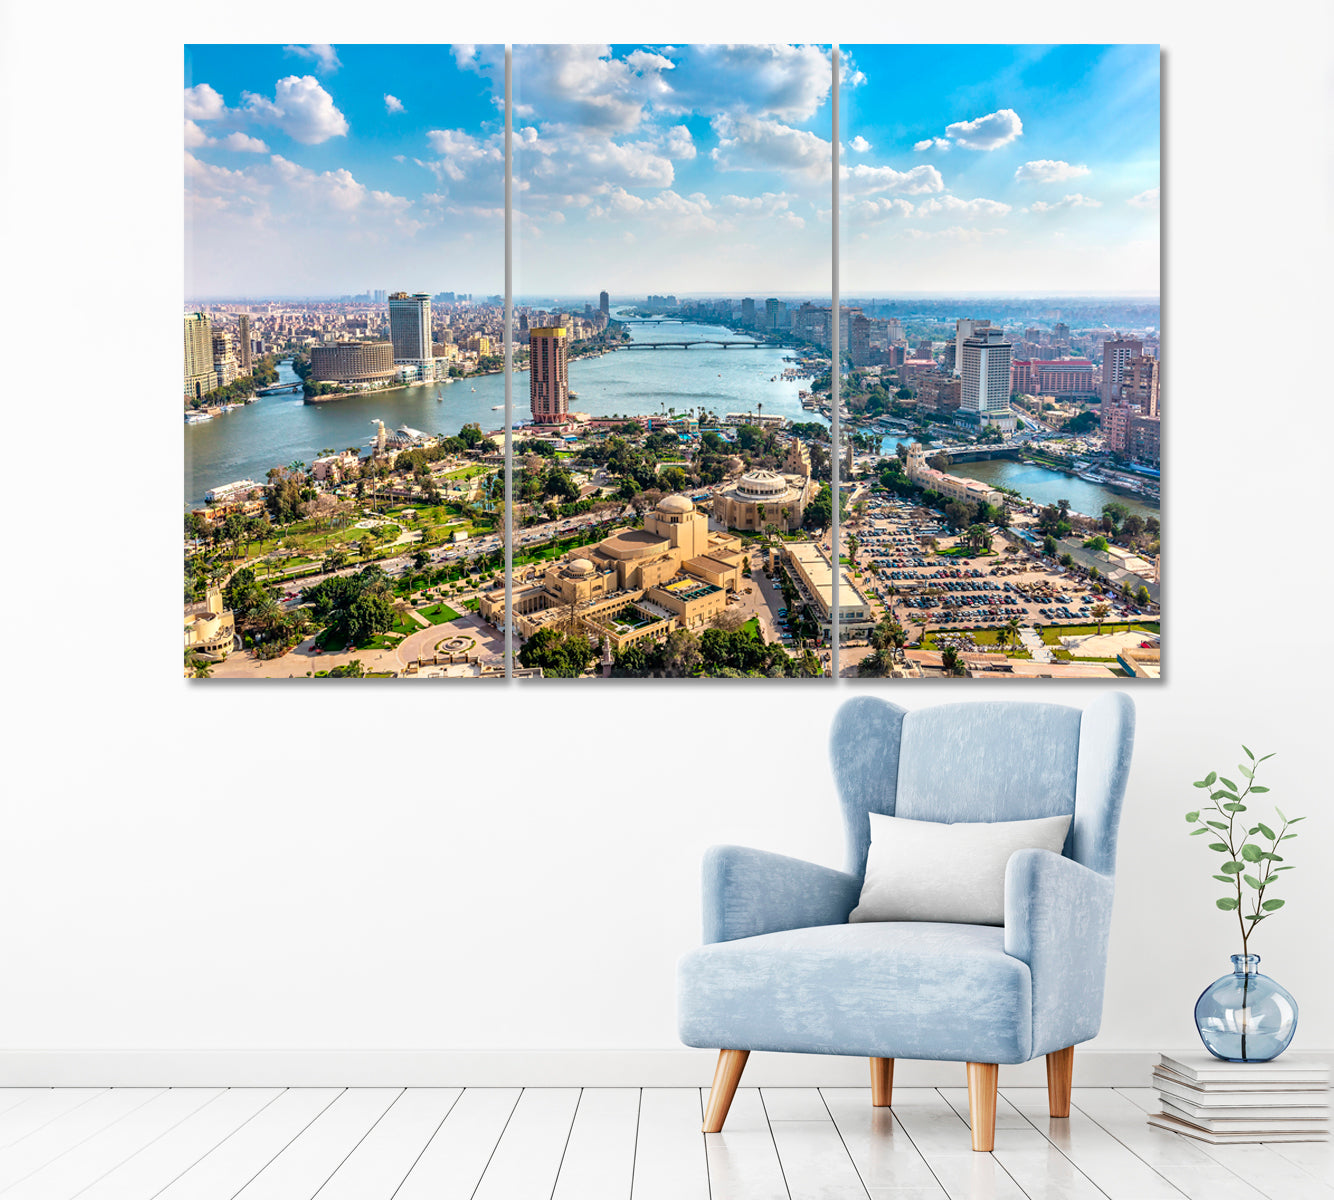 Cairo on Nile River Egypt Canvas Print ArtLexy 3 Panels 36"x24" inches 